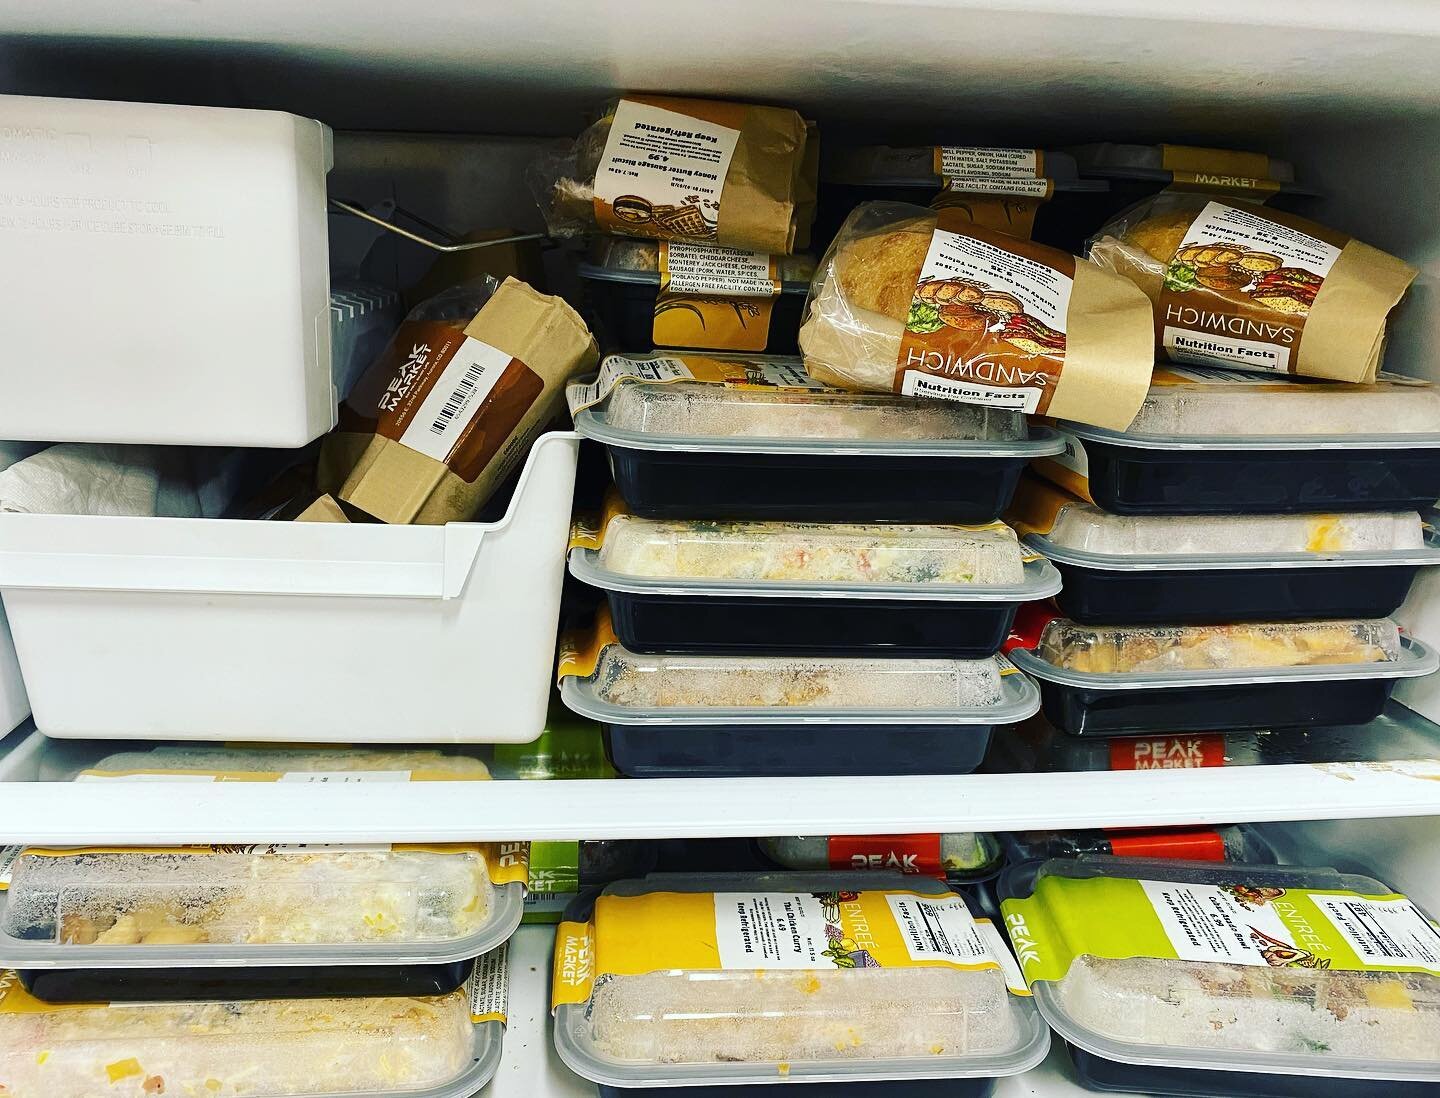 A picture of a full freezer isn&rsquo;t that impressive but we are so, so grateful for the support of @peak_refreshments !! Putting in a full days work on an empty stomach is tough to do so they&rsquo;ve been fueling our team with healthy lunches eve